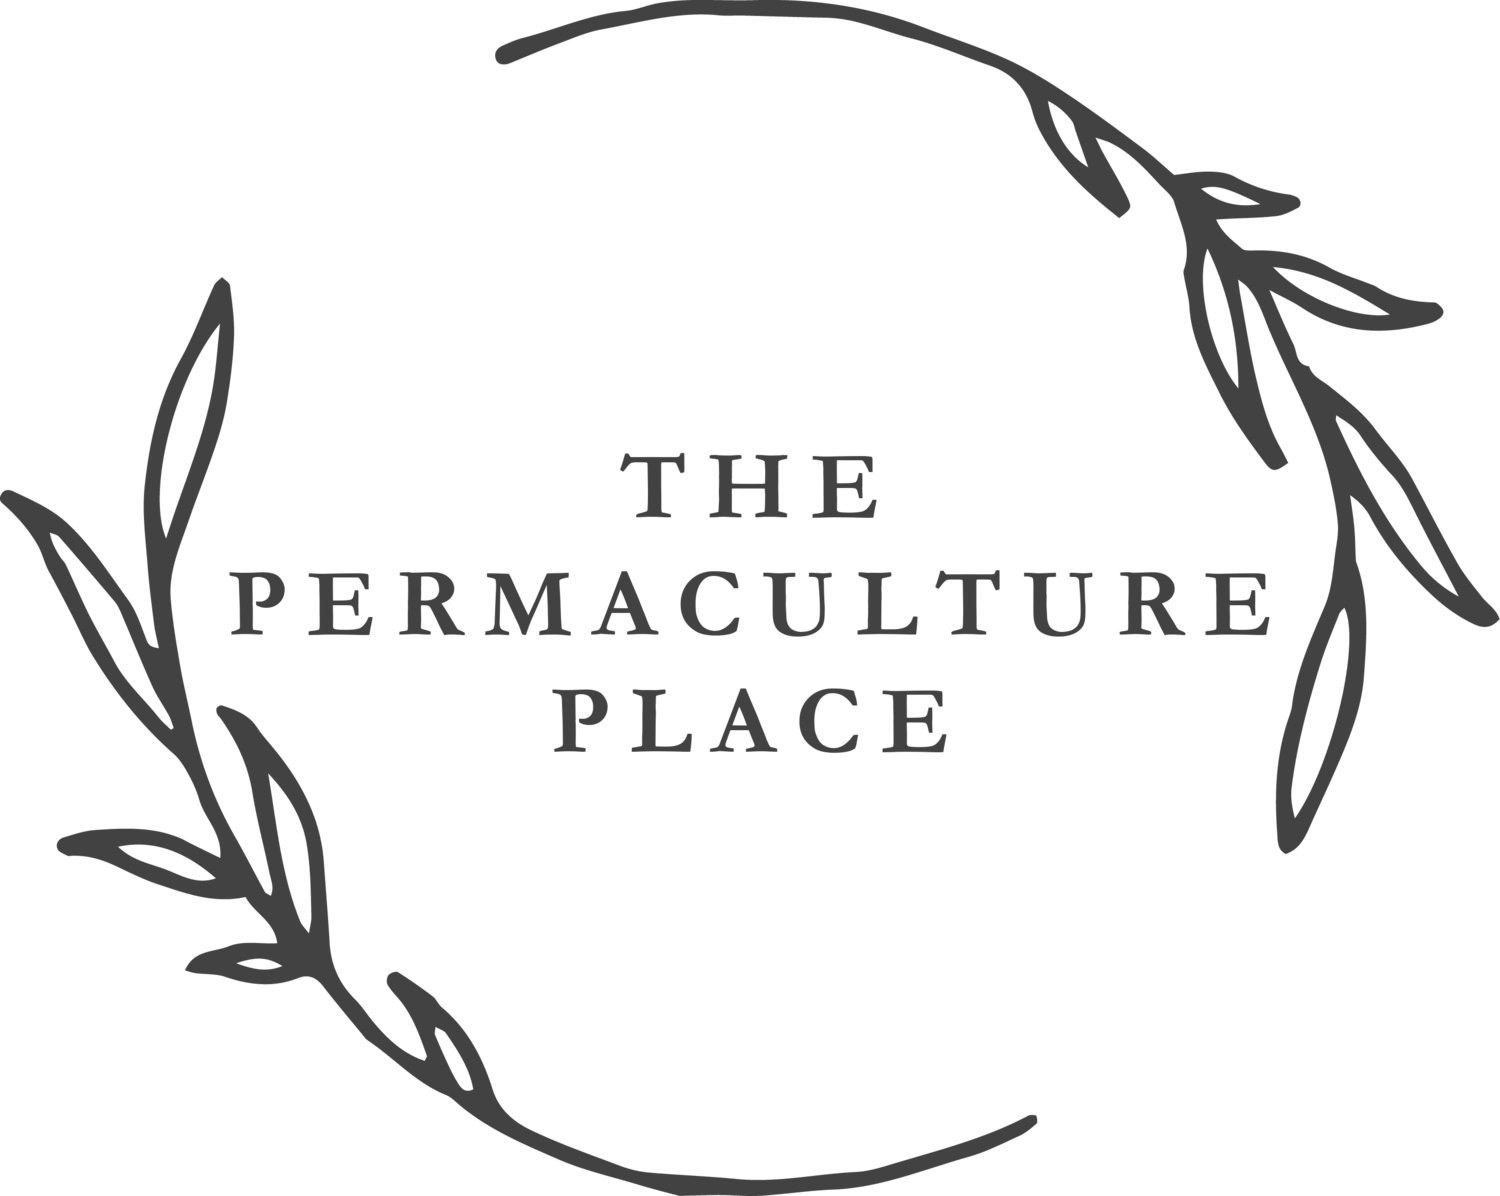 The Permaculture Place